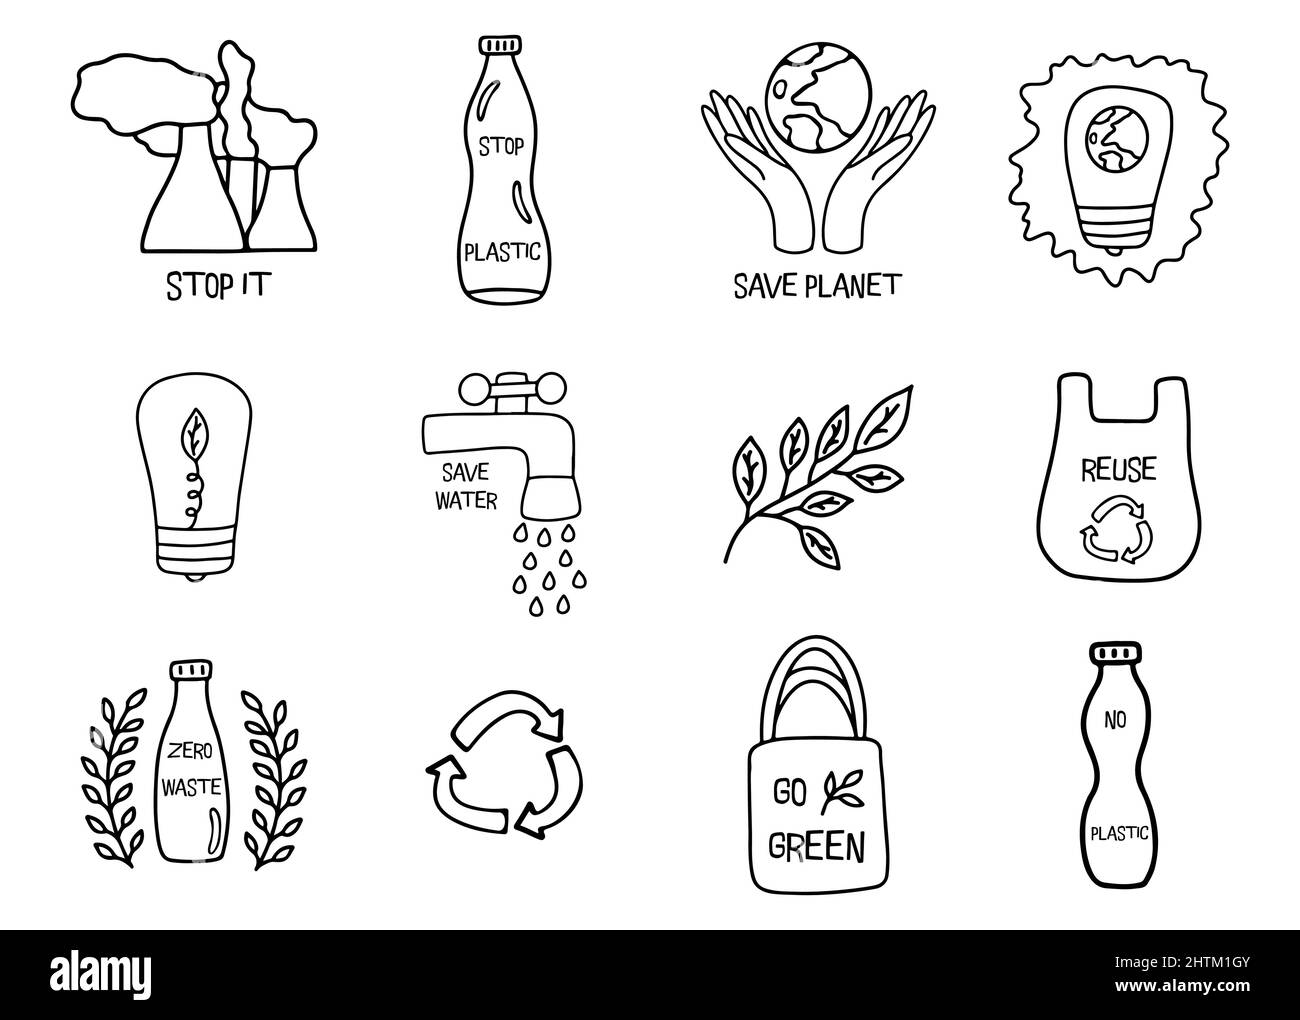 Recyclin symbol Black and White Stock Photos & Images - Alamy